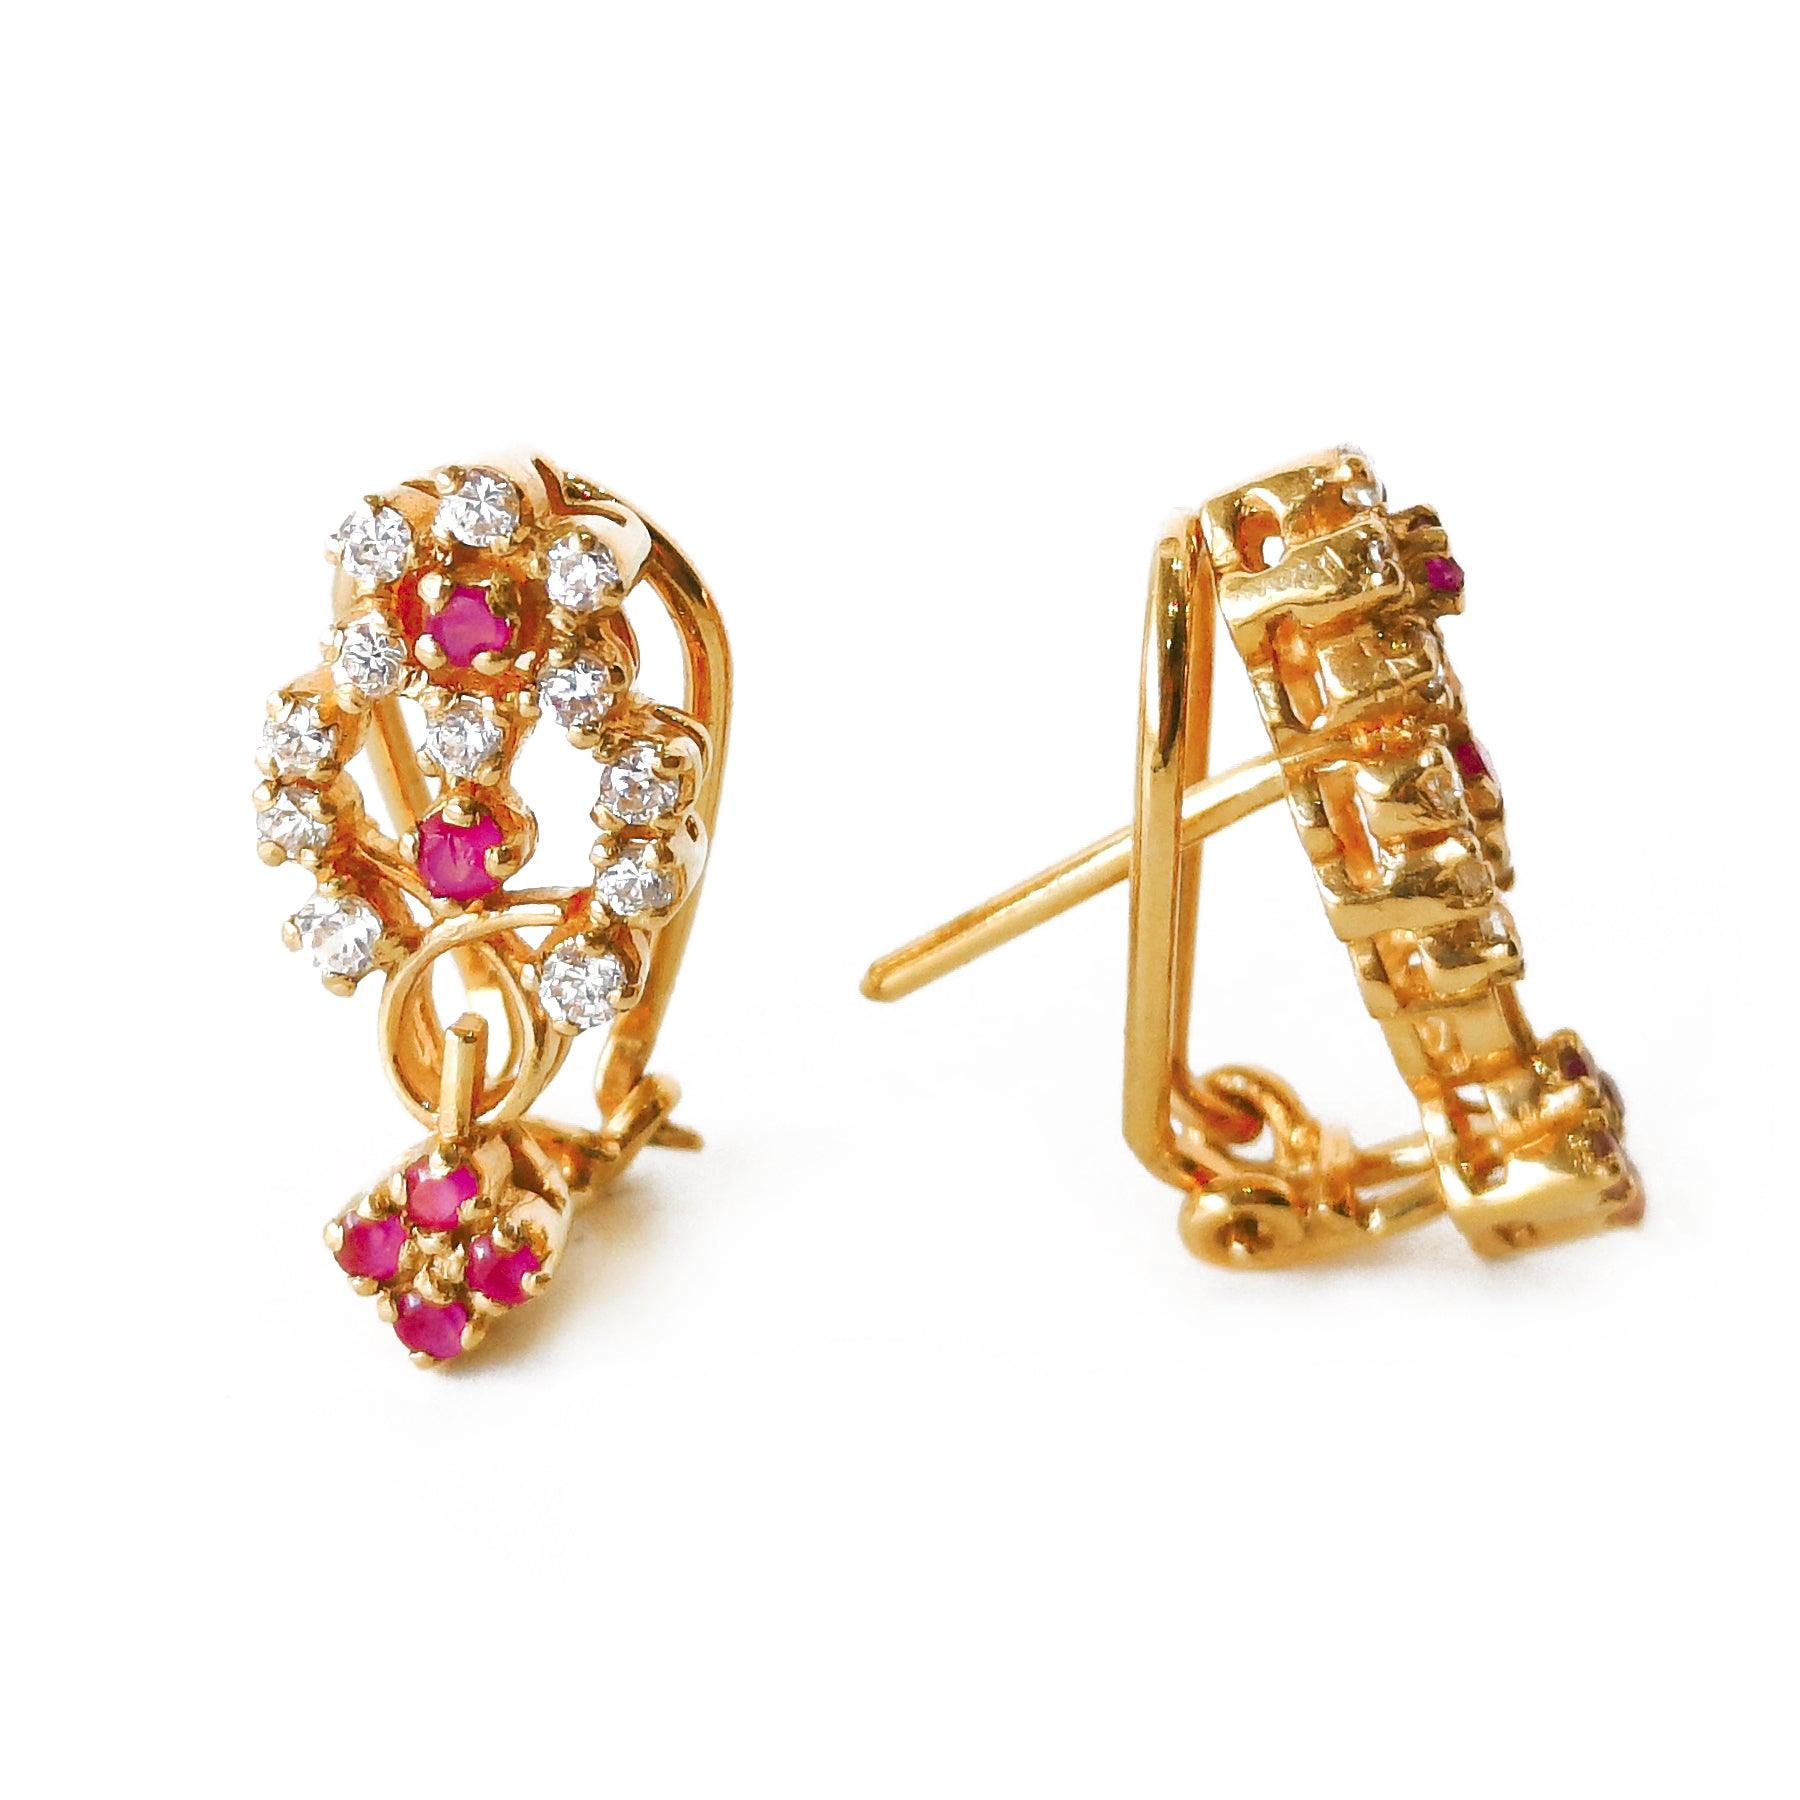 22ct Gold Stud Earrings set with Cubic Zirconias and Coloured Stones (8.6g) E-3375